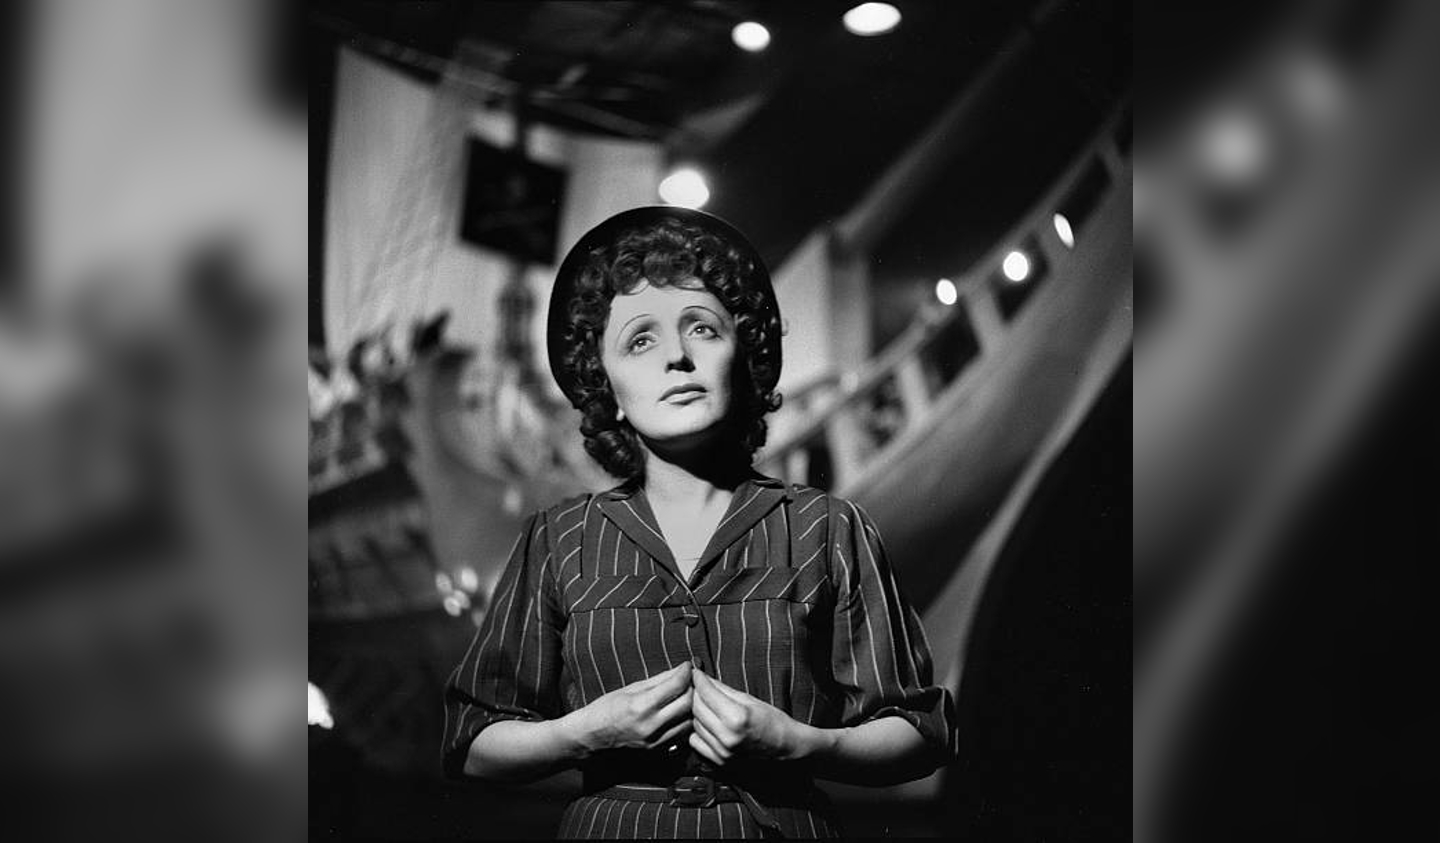 FRANCE - 1950:  Edith Piaf (1915-1963), French singer.  (Photo by Gaston Paris/Roger Viollet via Getty Images)